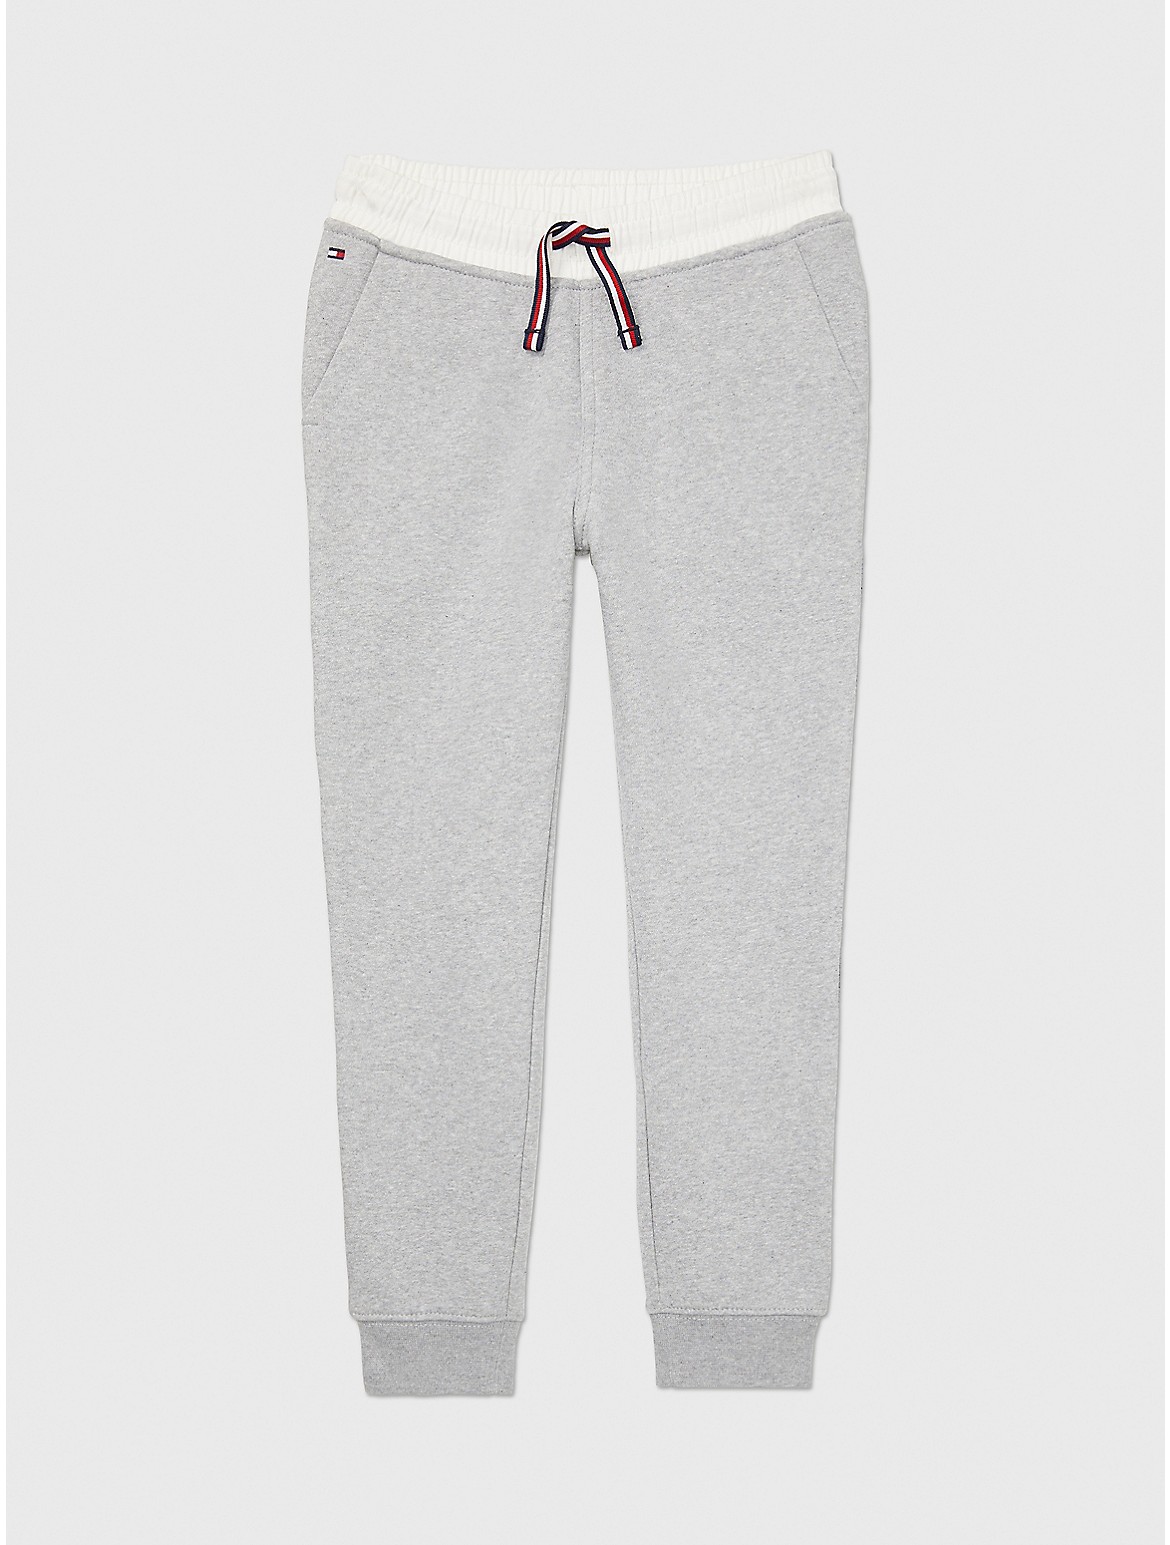 Tommy Hilfiger Boys' Solid Jogger Pant - Grey - S